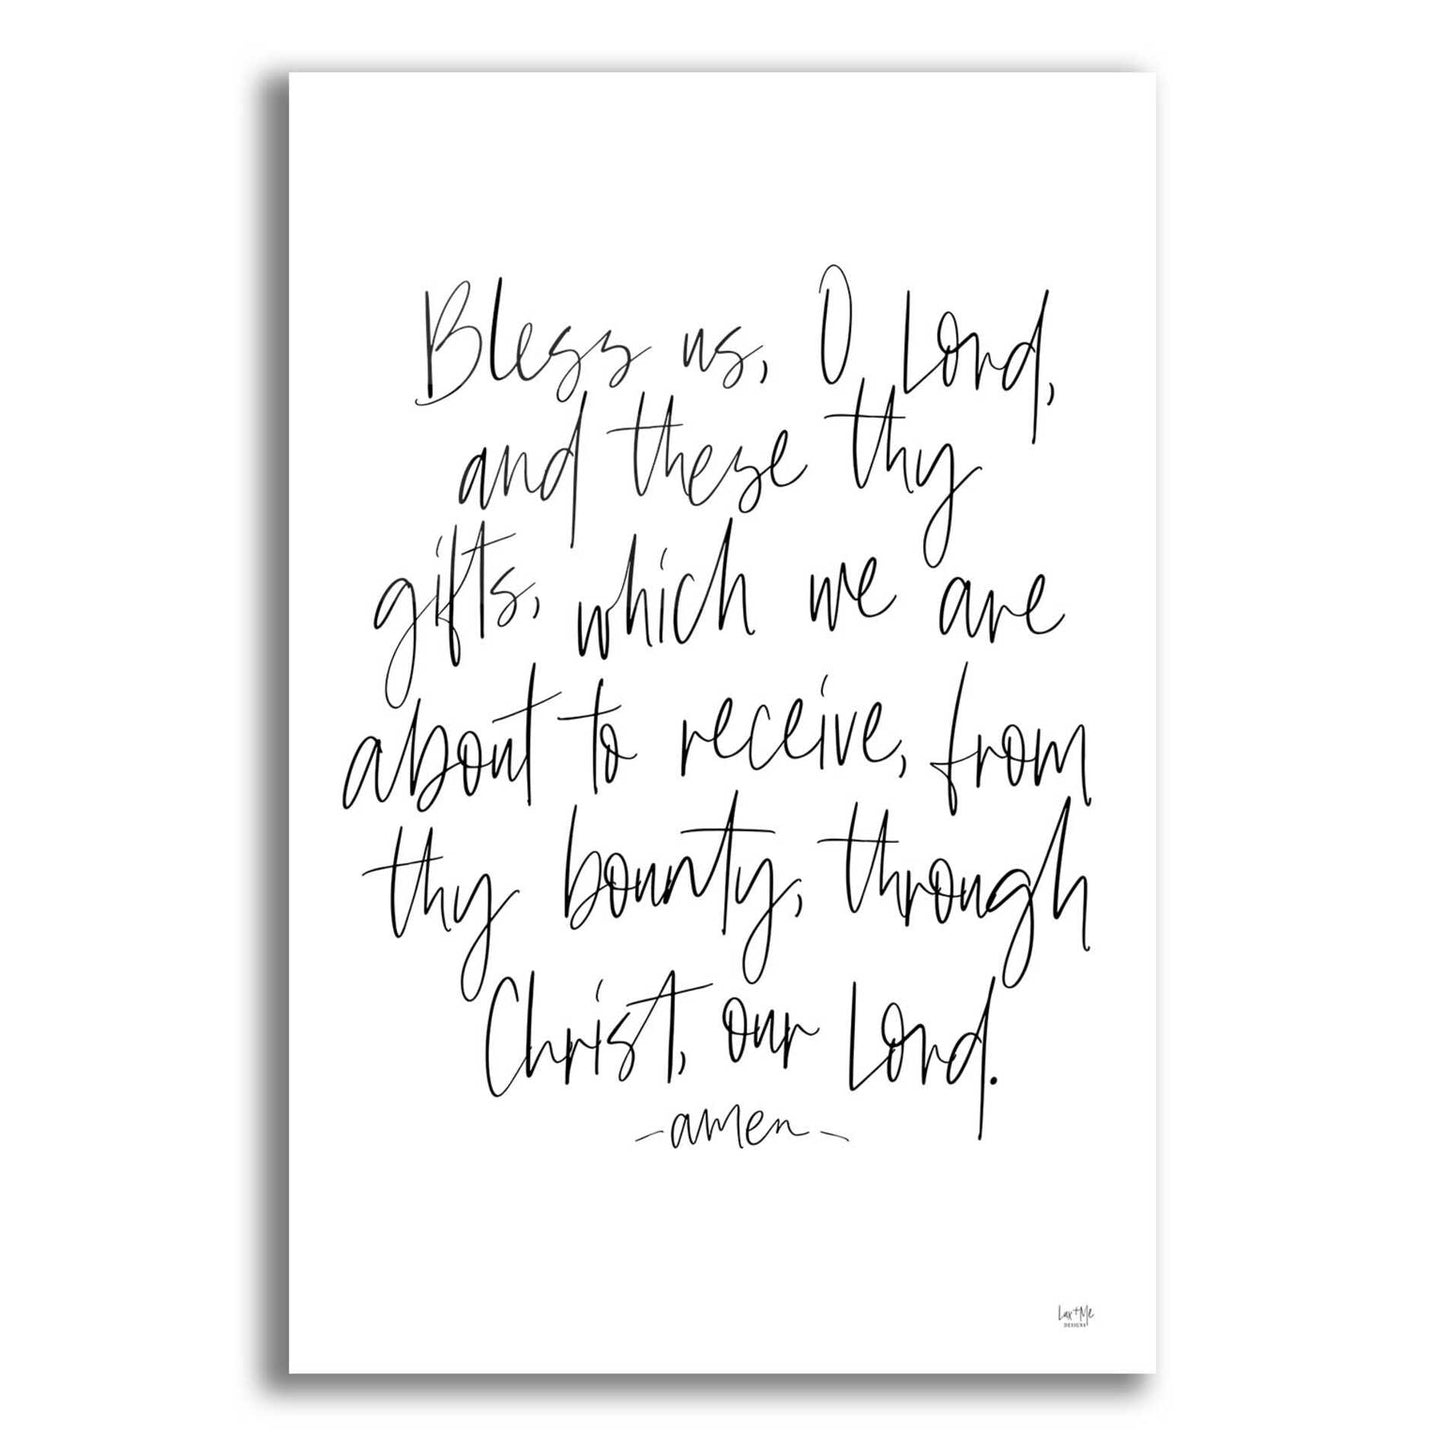 Epic Art 'Bless Us on White' by Lux + Me Designs, Acrylic Glass Wall Art,12x16